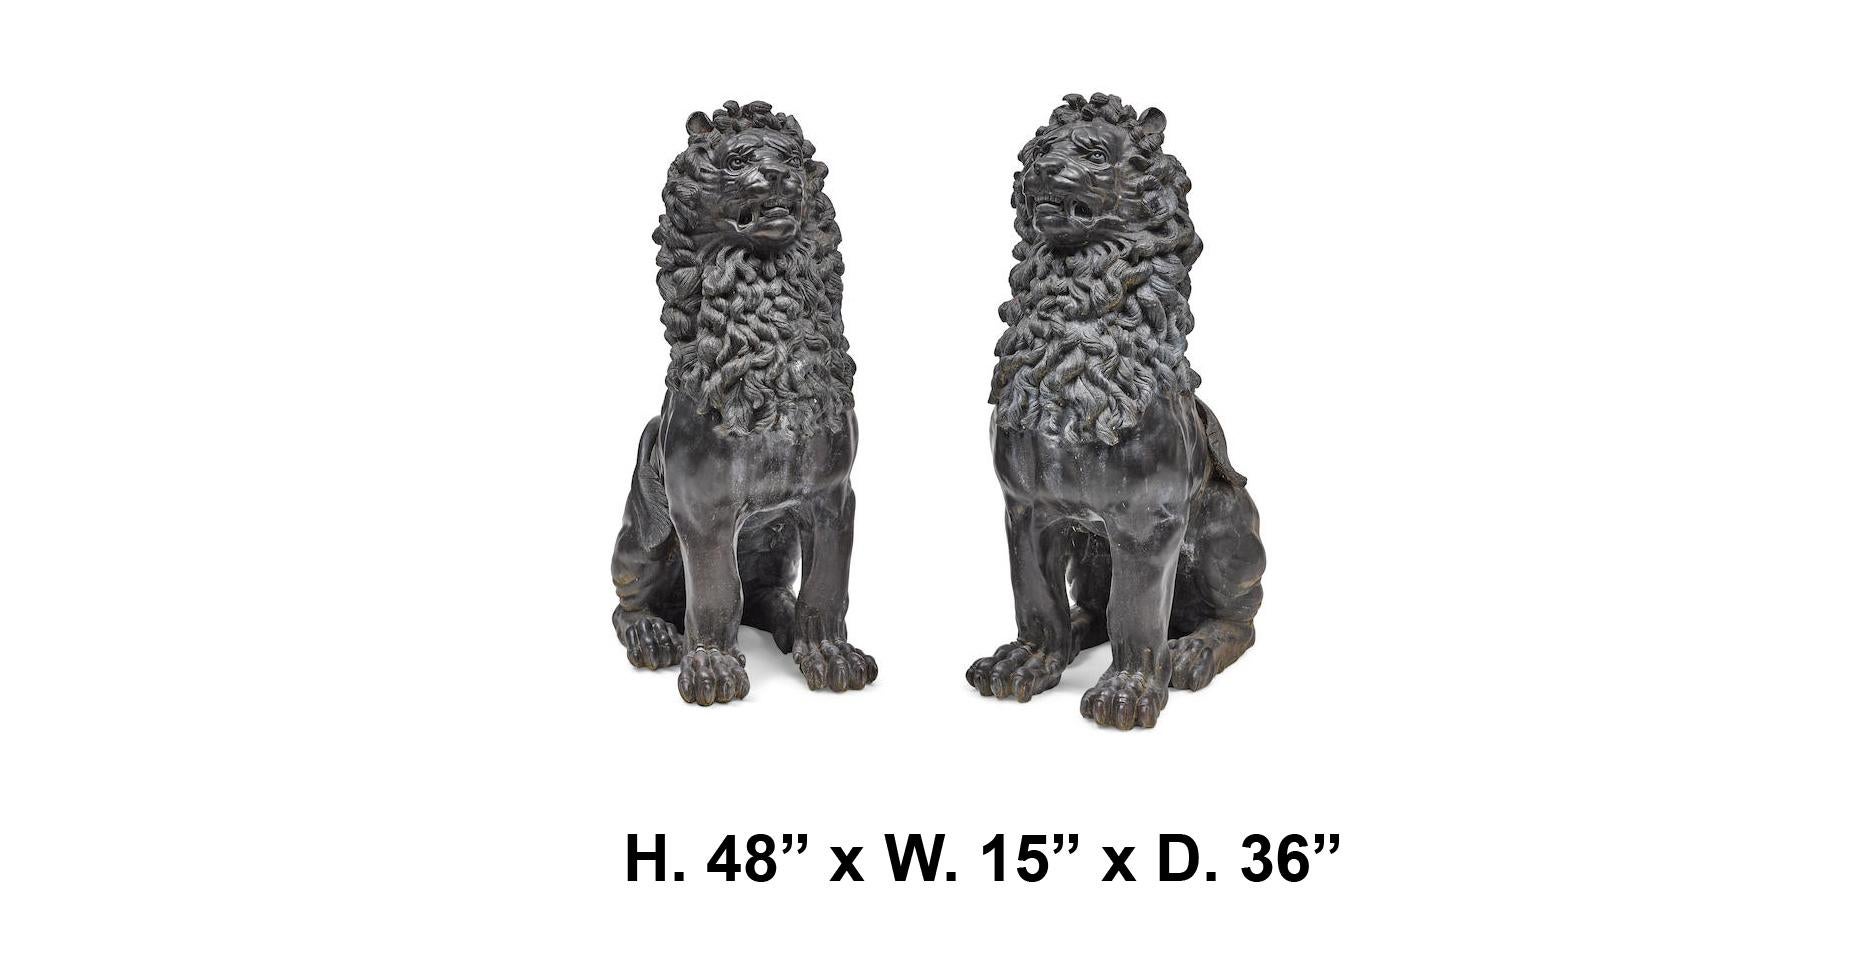 Magnificent life-size pair of Renaissance style black patinated bronze Guardian lions.
First half 20th century.

Meticulous attention was given to every detail of the lions. This pair can be purposed as an accenting piece in either the interior and